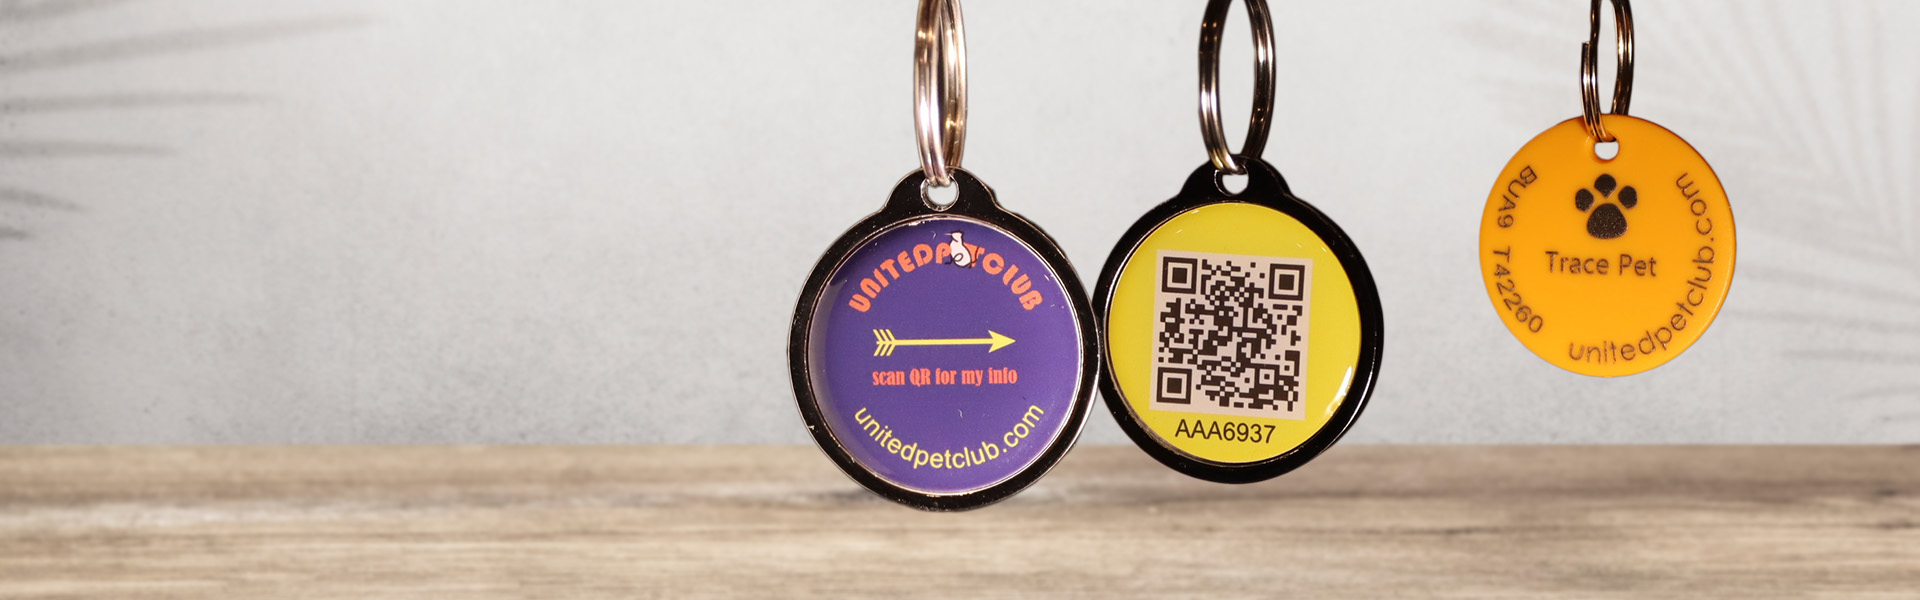 Pet recovery Tags, dog Tag, Cat Tag, Animal Tag